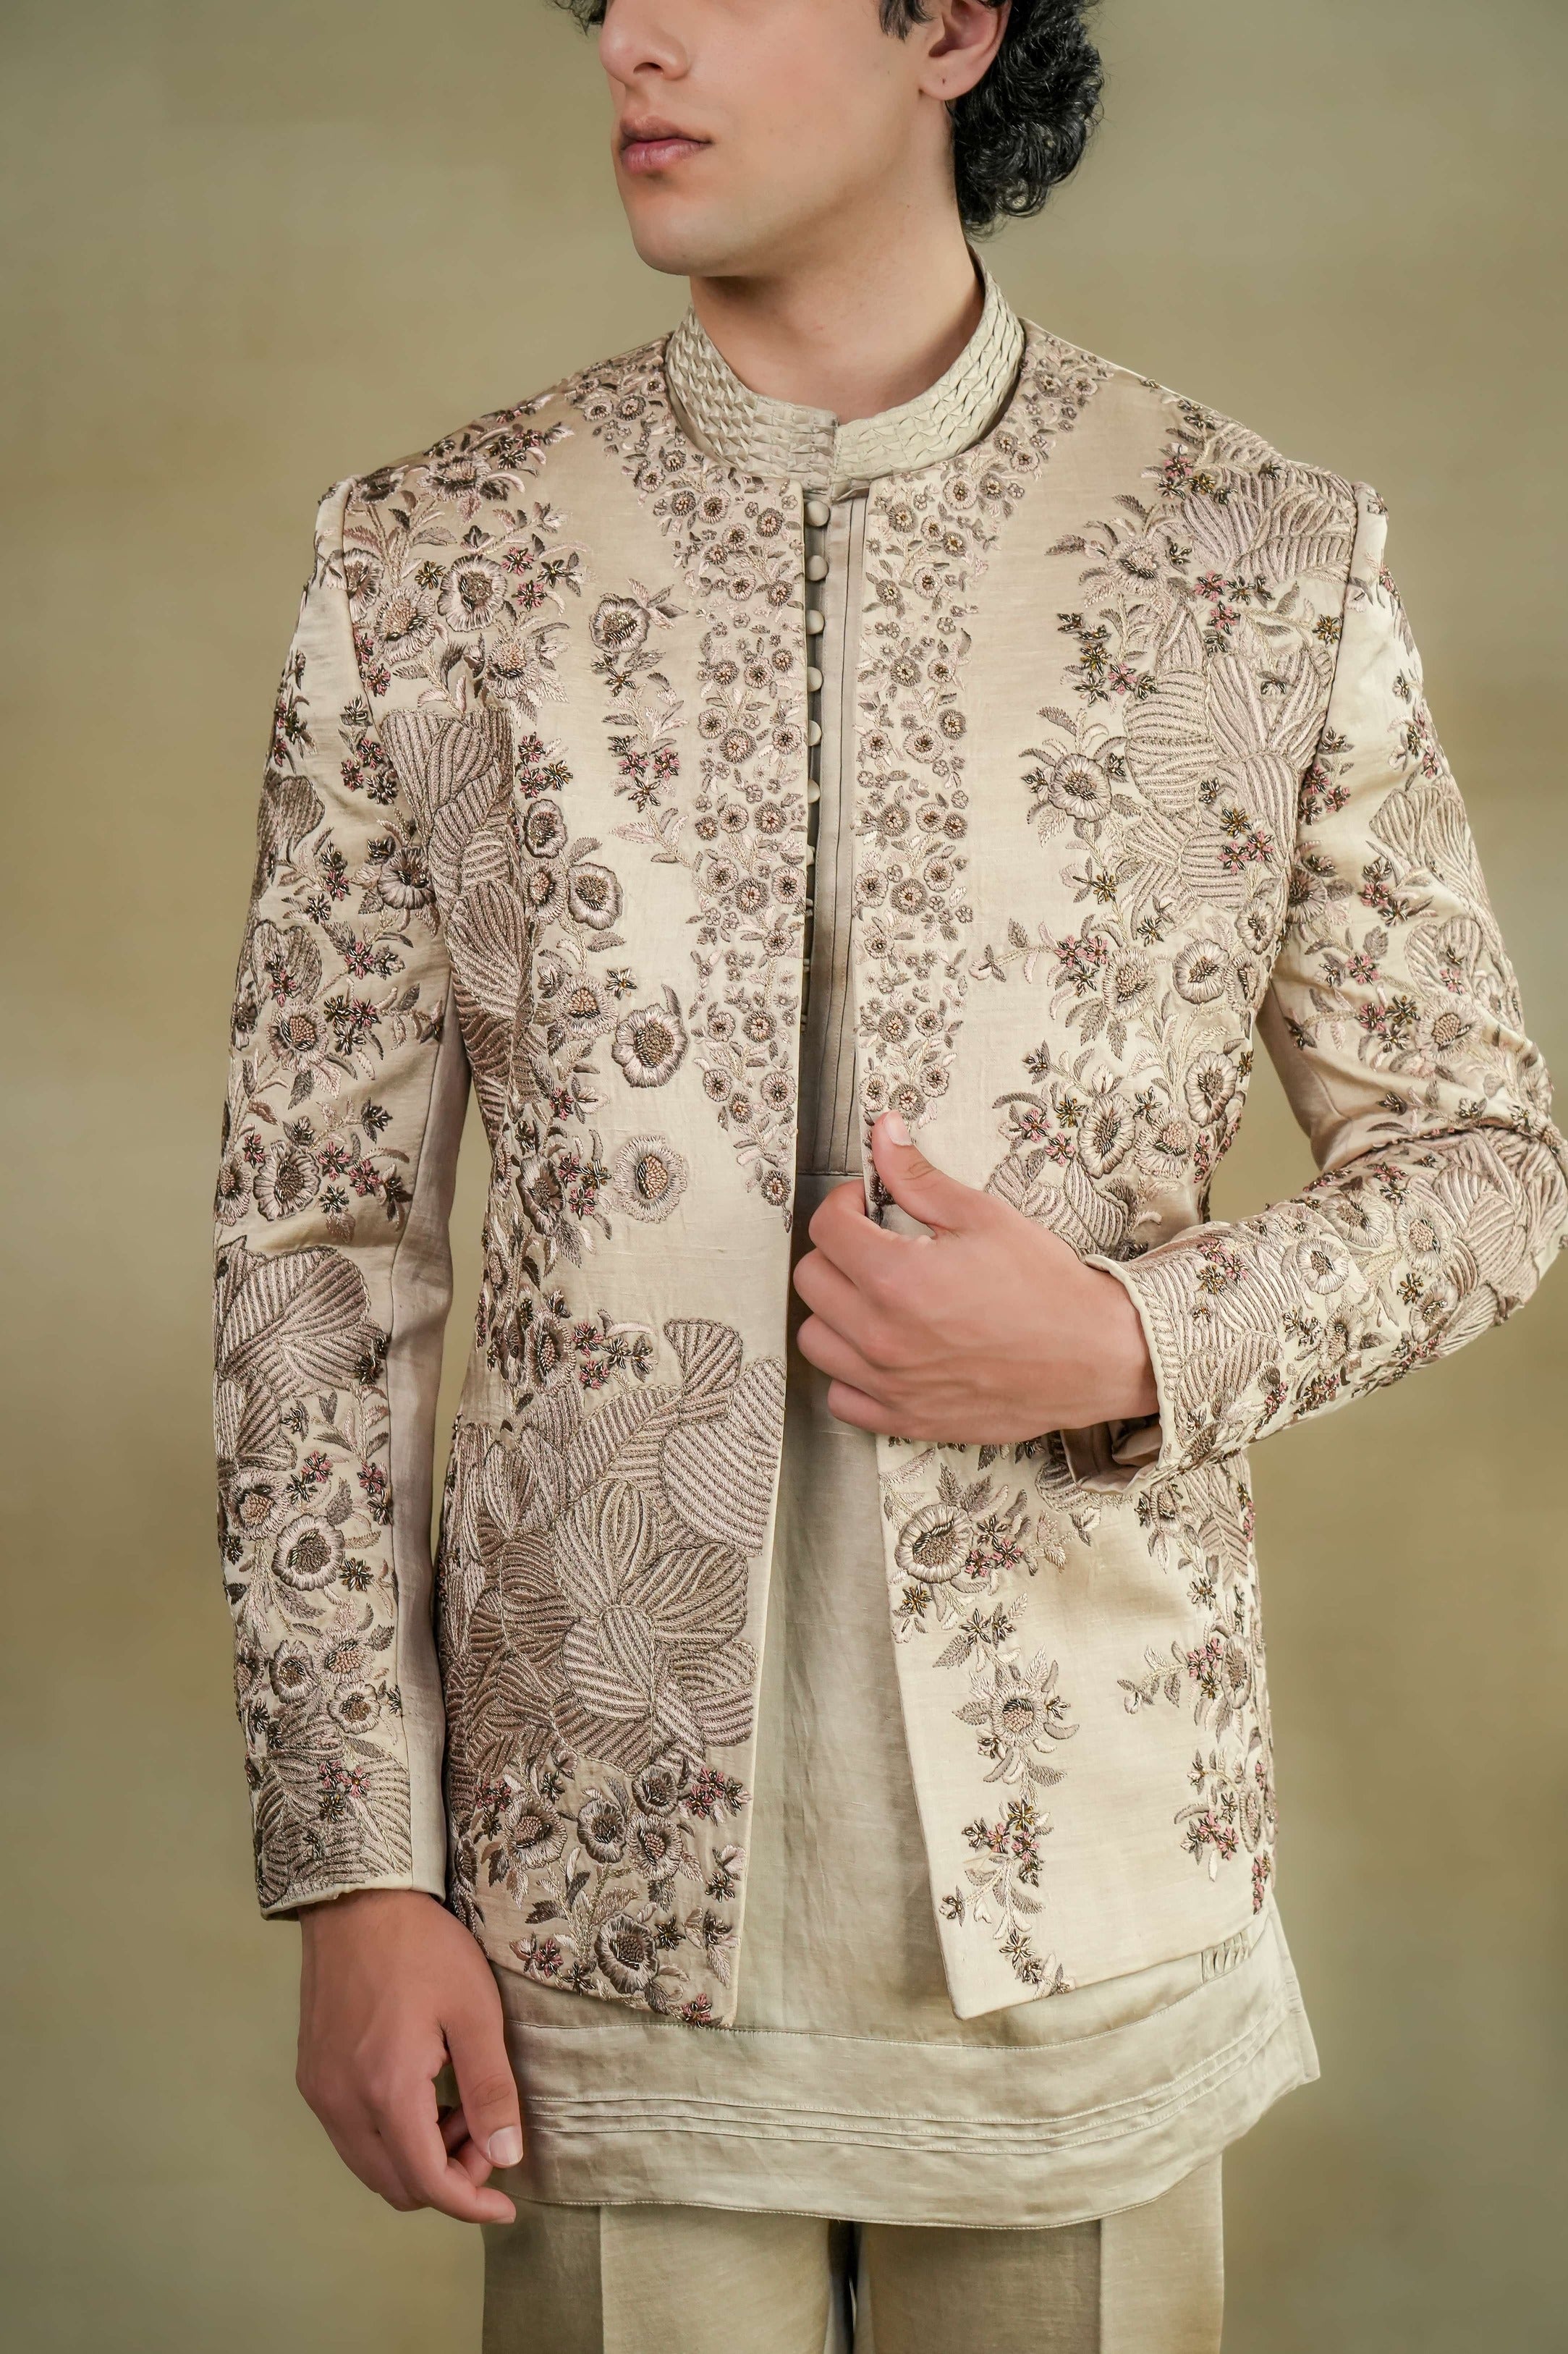  sand grey short jacket, adorned with exquisite hand-embroidery details for a touch of sophistication and style. 